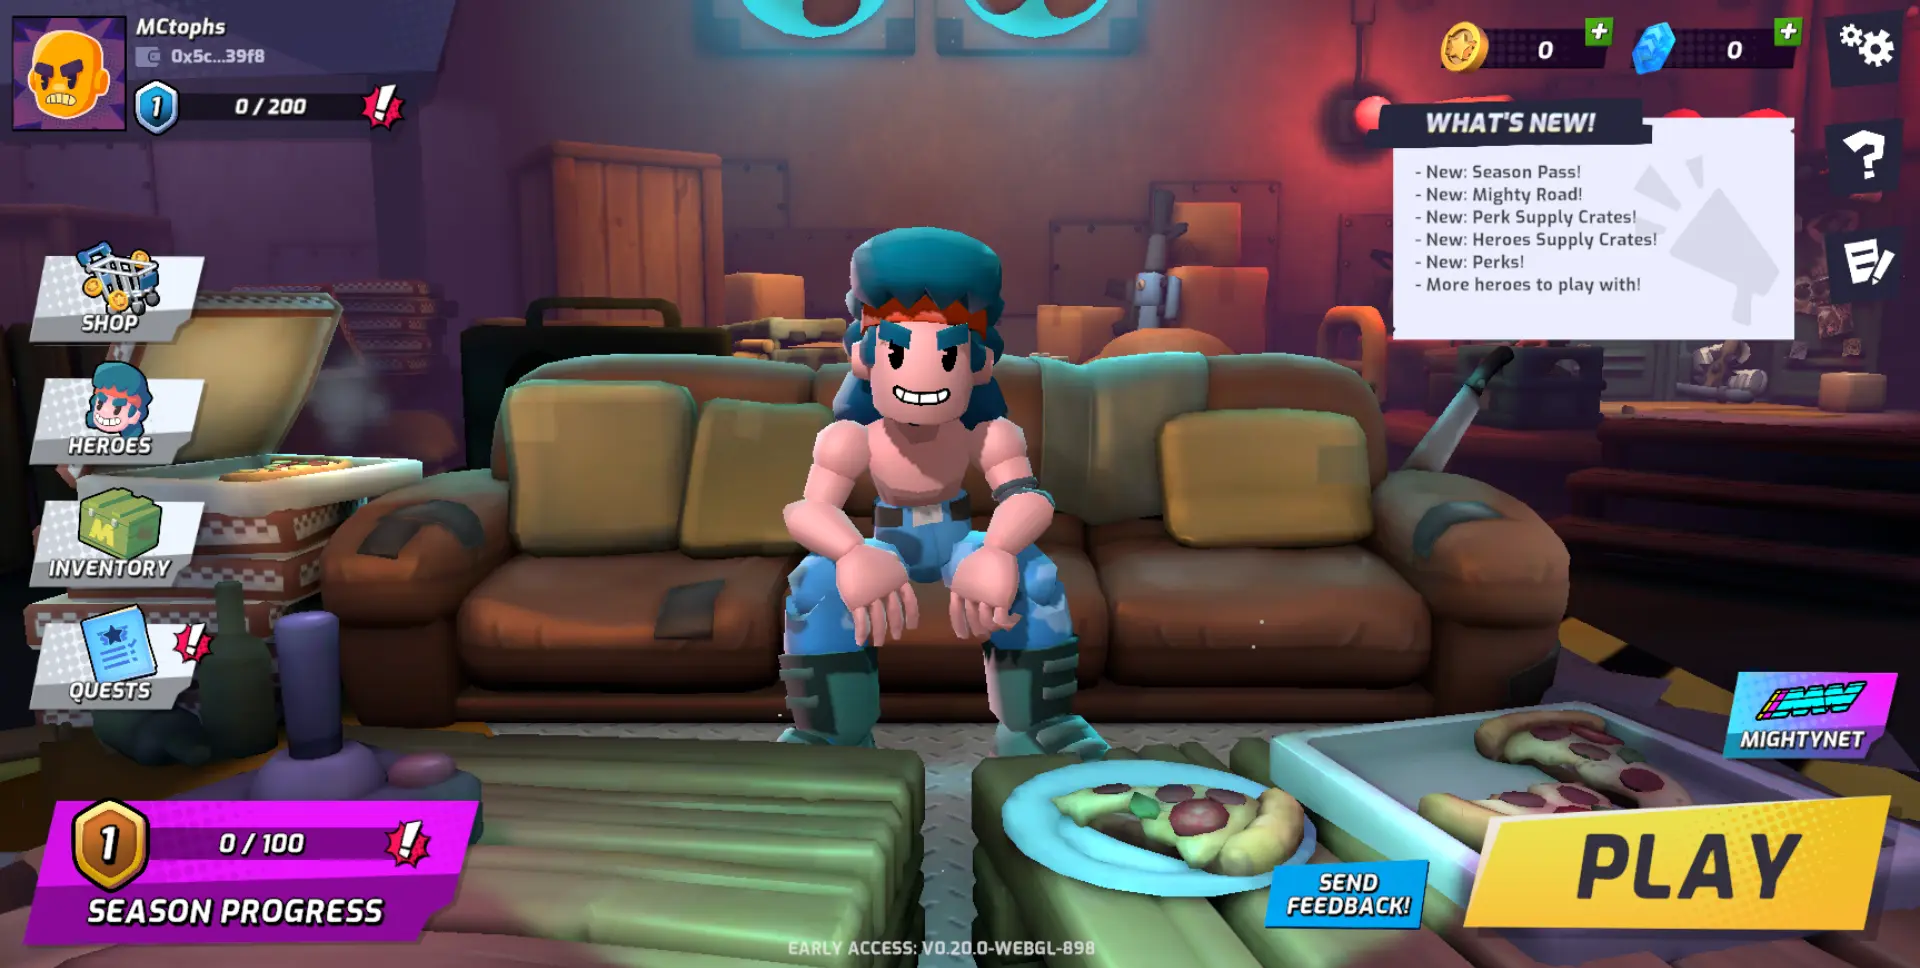 The Home Screen of Mighty Action Heroes serves as the lobby upon opening the game, displaying various buttons that players can explore before entering a match.